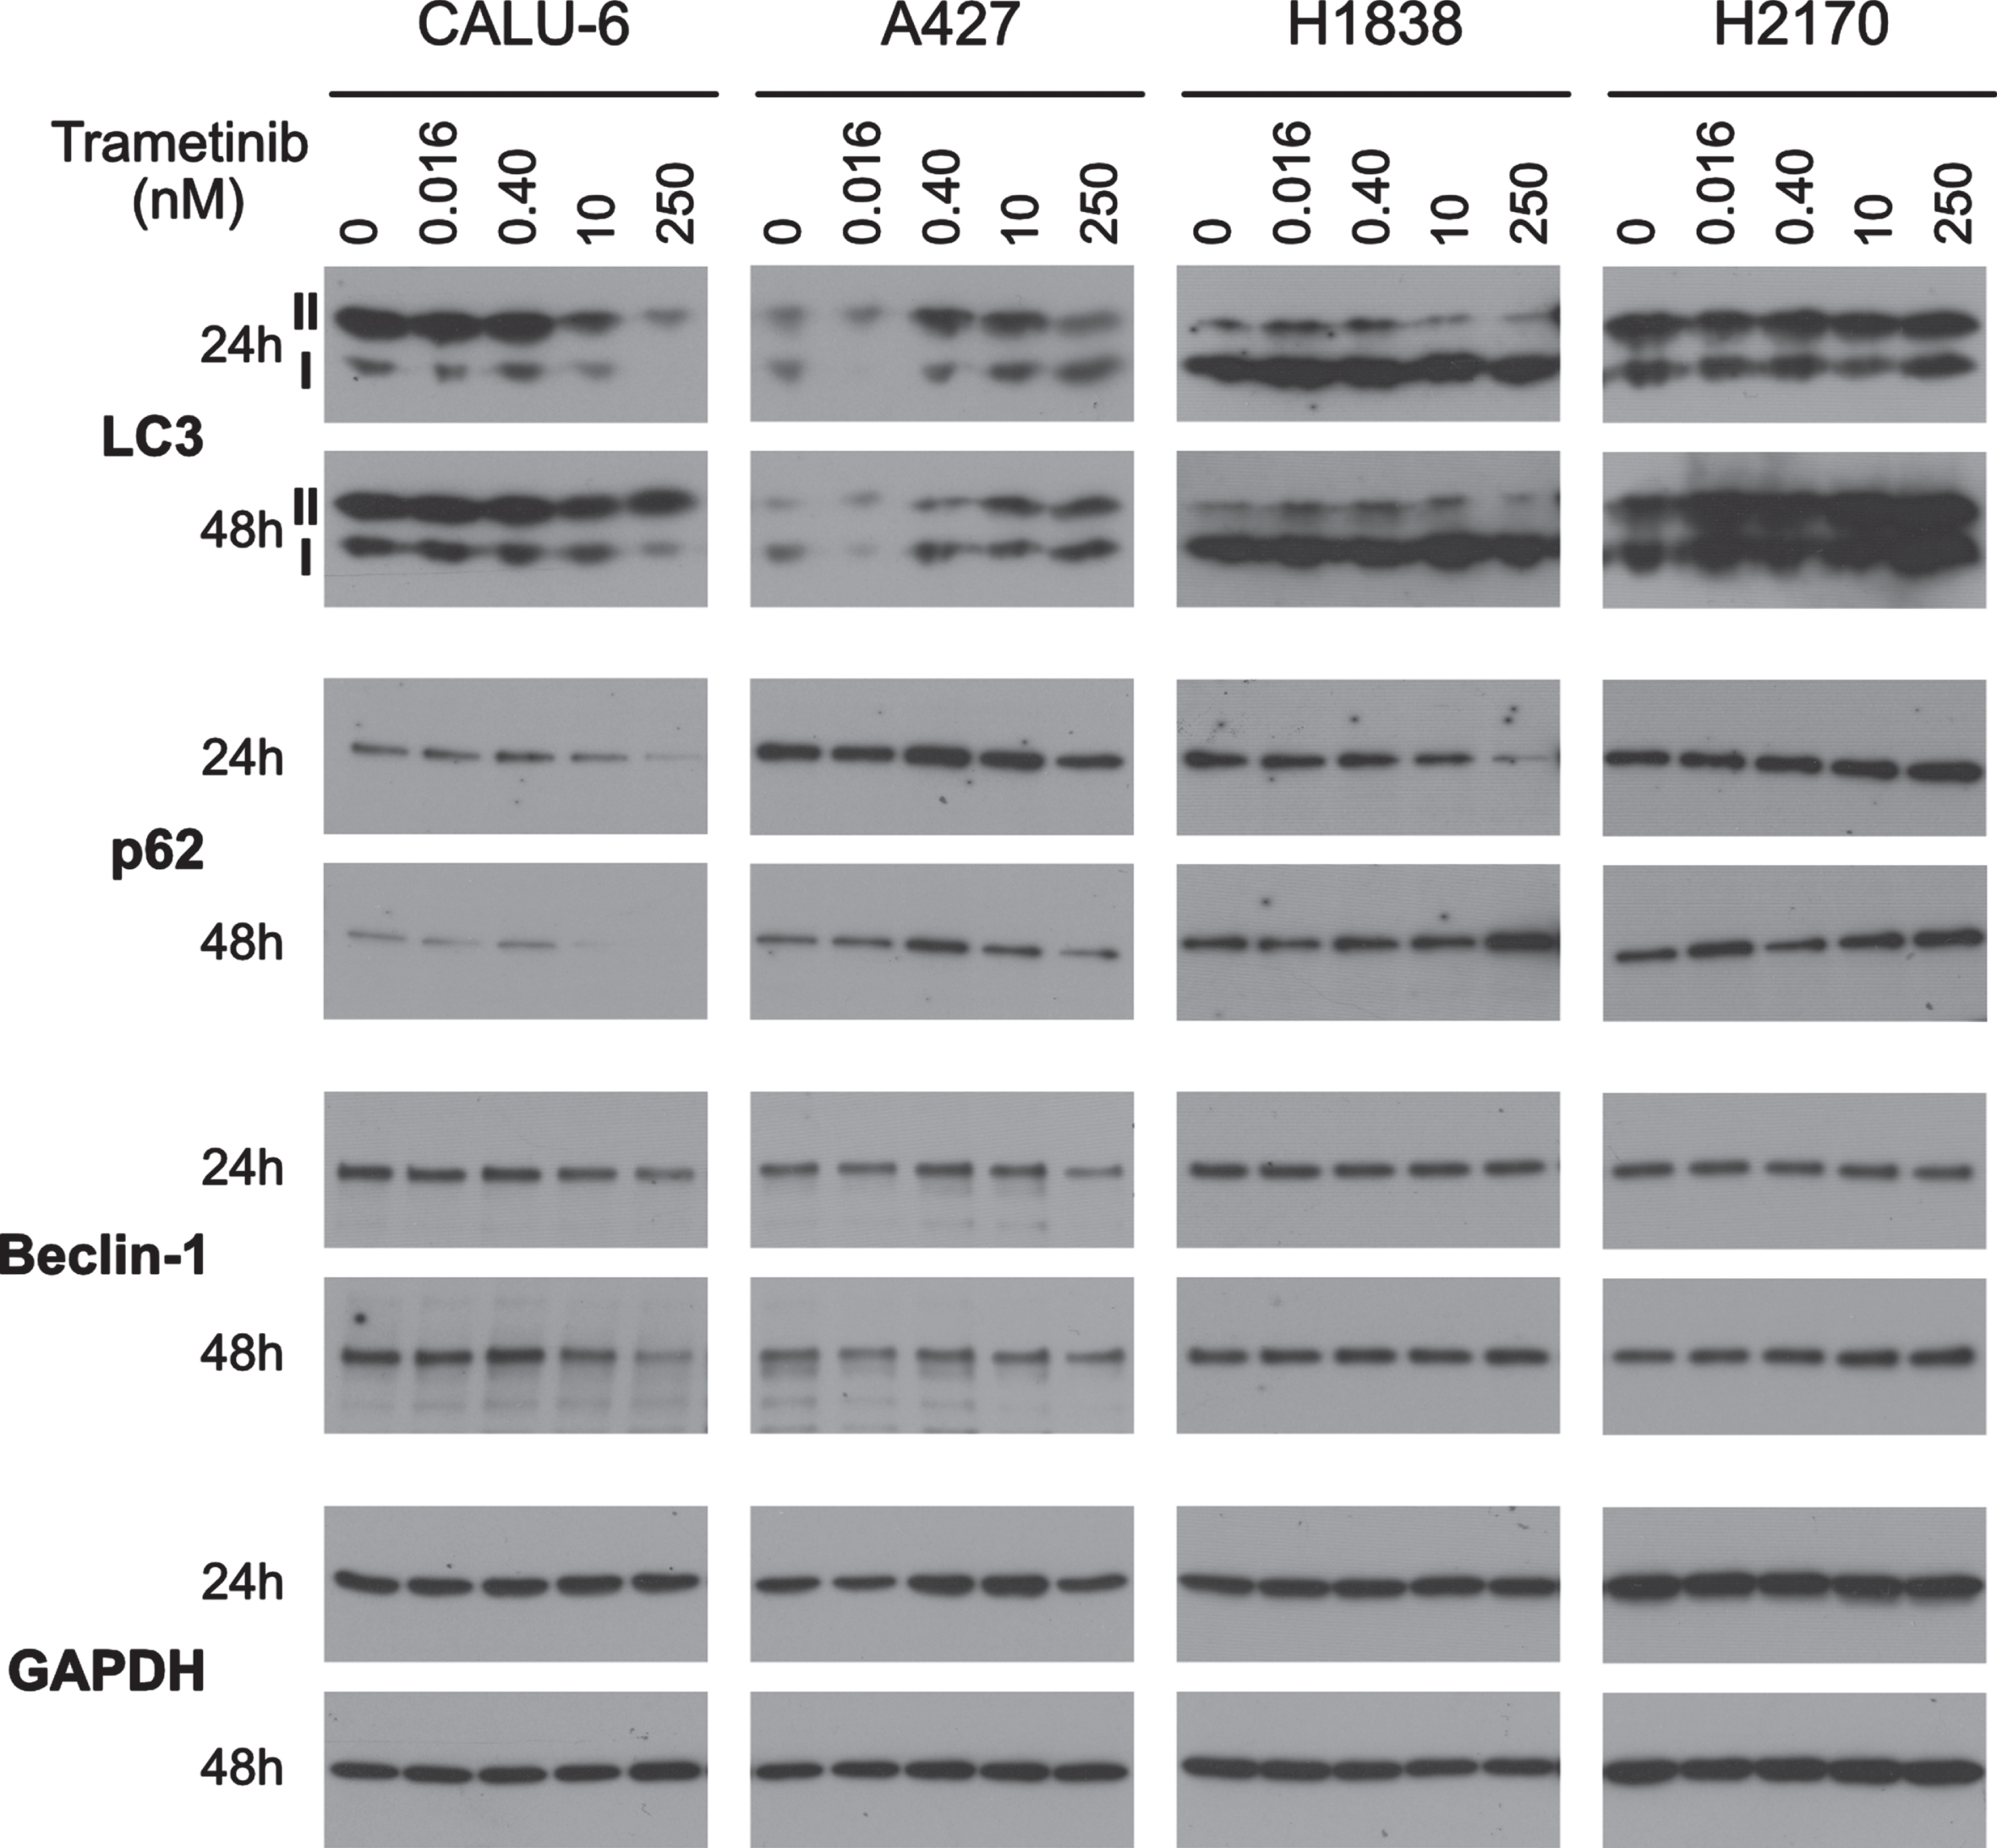 Autophagy as a protective mechanism against trametinib. Autophagy flux (LC3 and p62) and initiation (Beclin 1) was determined by performing immunoblotting of one highly sensitive (CALU-6), one moderately sensitive (A427) and two minimally sensitive (H1838 & H2170) cell lines. Cells were treated with 0, 0.016, 0.4, 10 or 250 nM trametinib for 24 or 48 h. Six ug of protein was loaded in each lane for each sample. Equal loading of protein was determined by GAPDH. Western blot images are representative of two independent experiments.